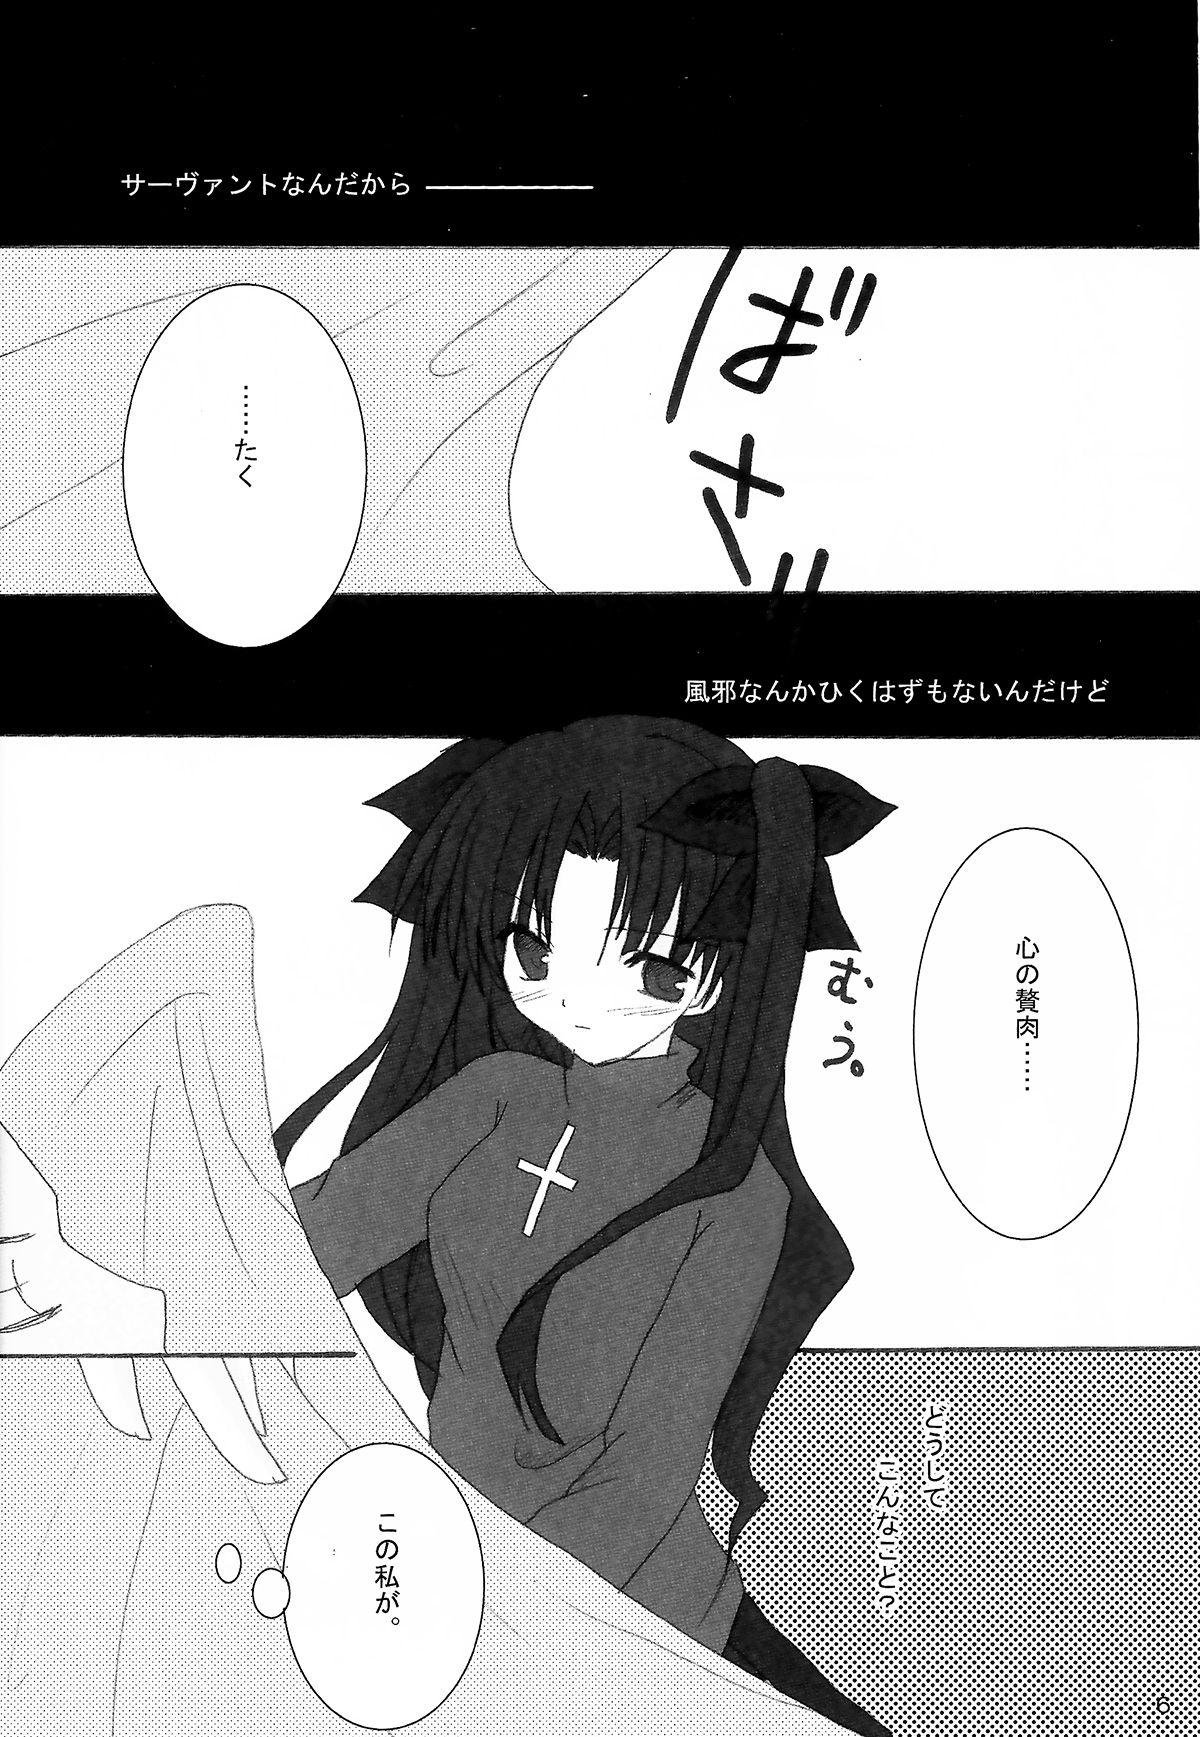 Gorgeous Infinite Emotion - Fate stay night Two - Page 4